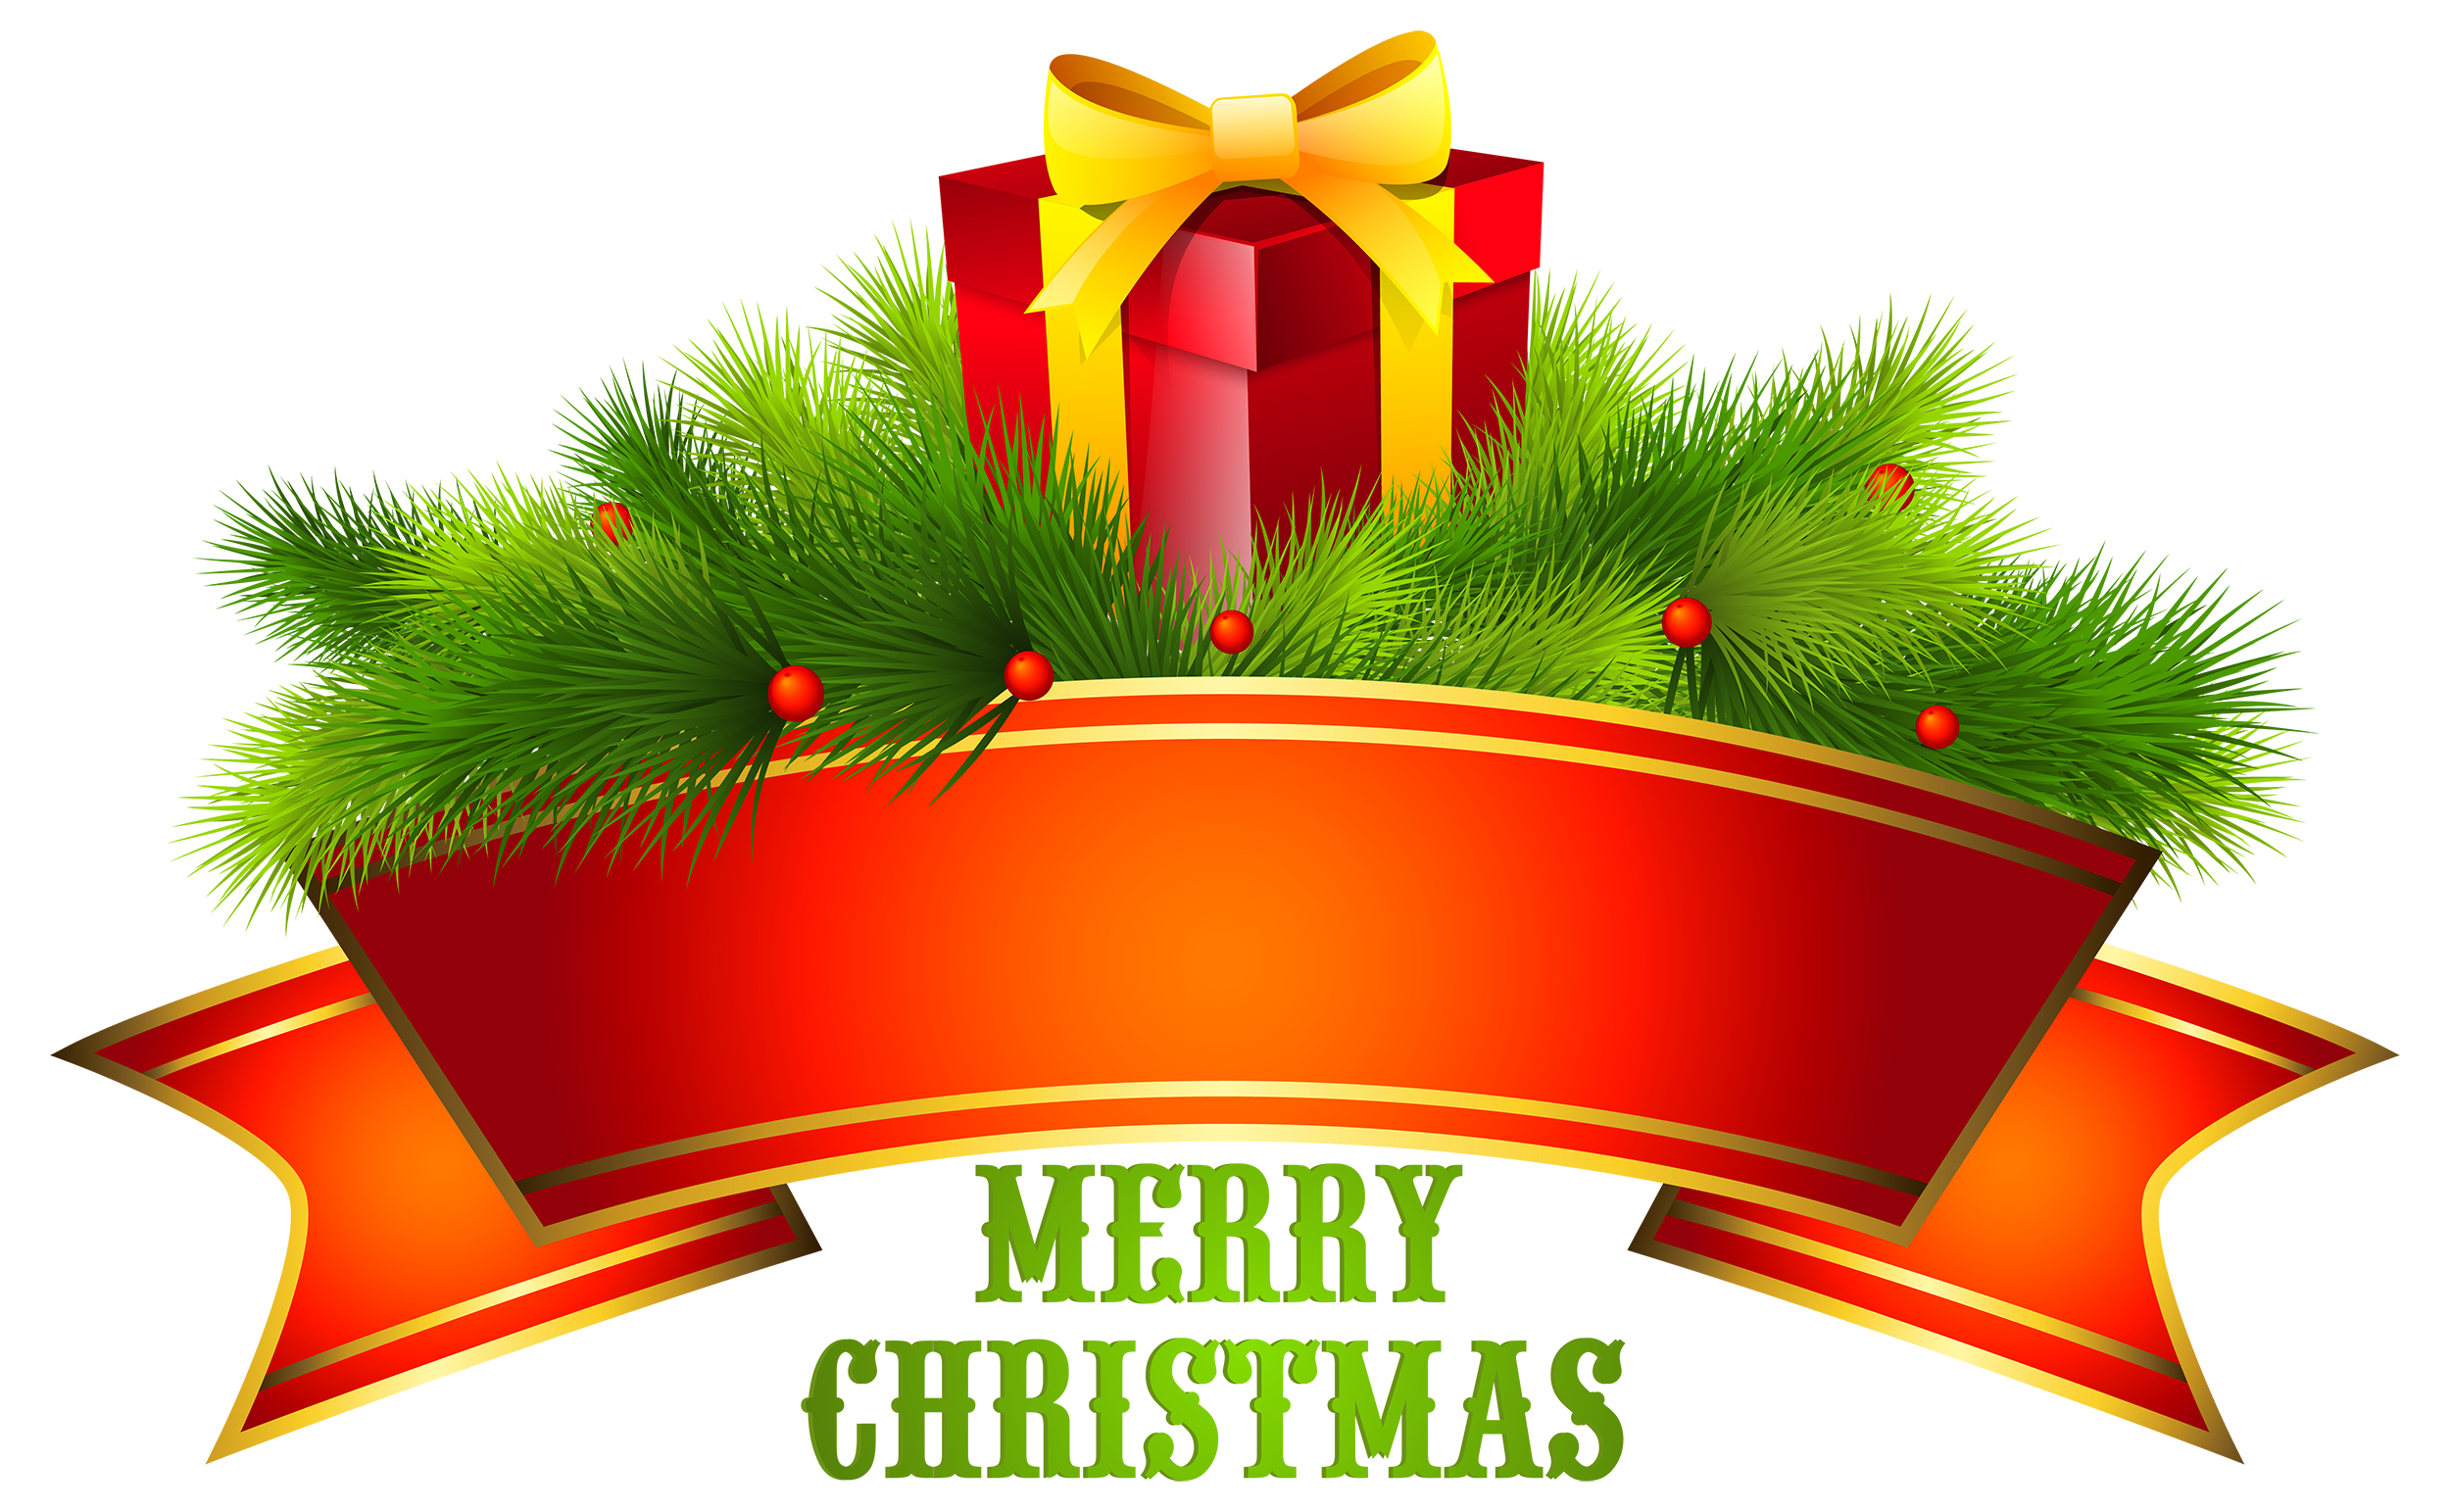 merry christmas clip art free download - photo #10